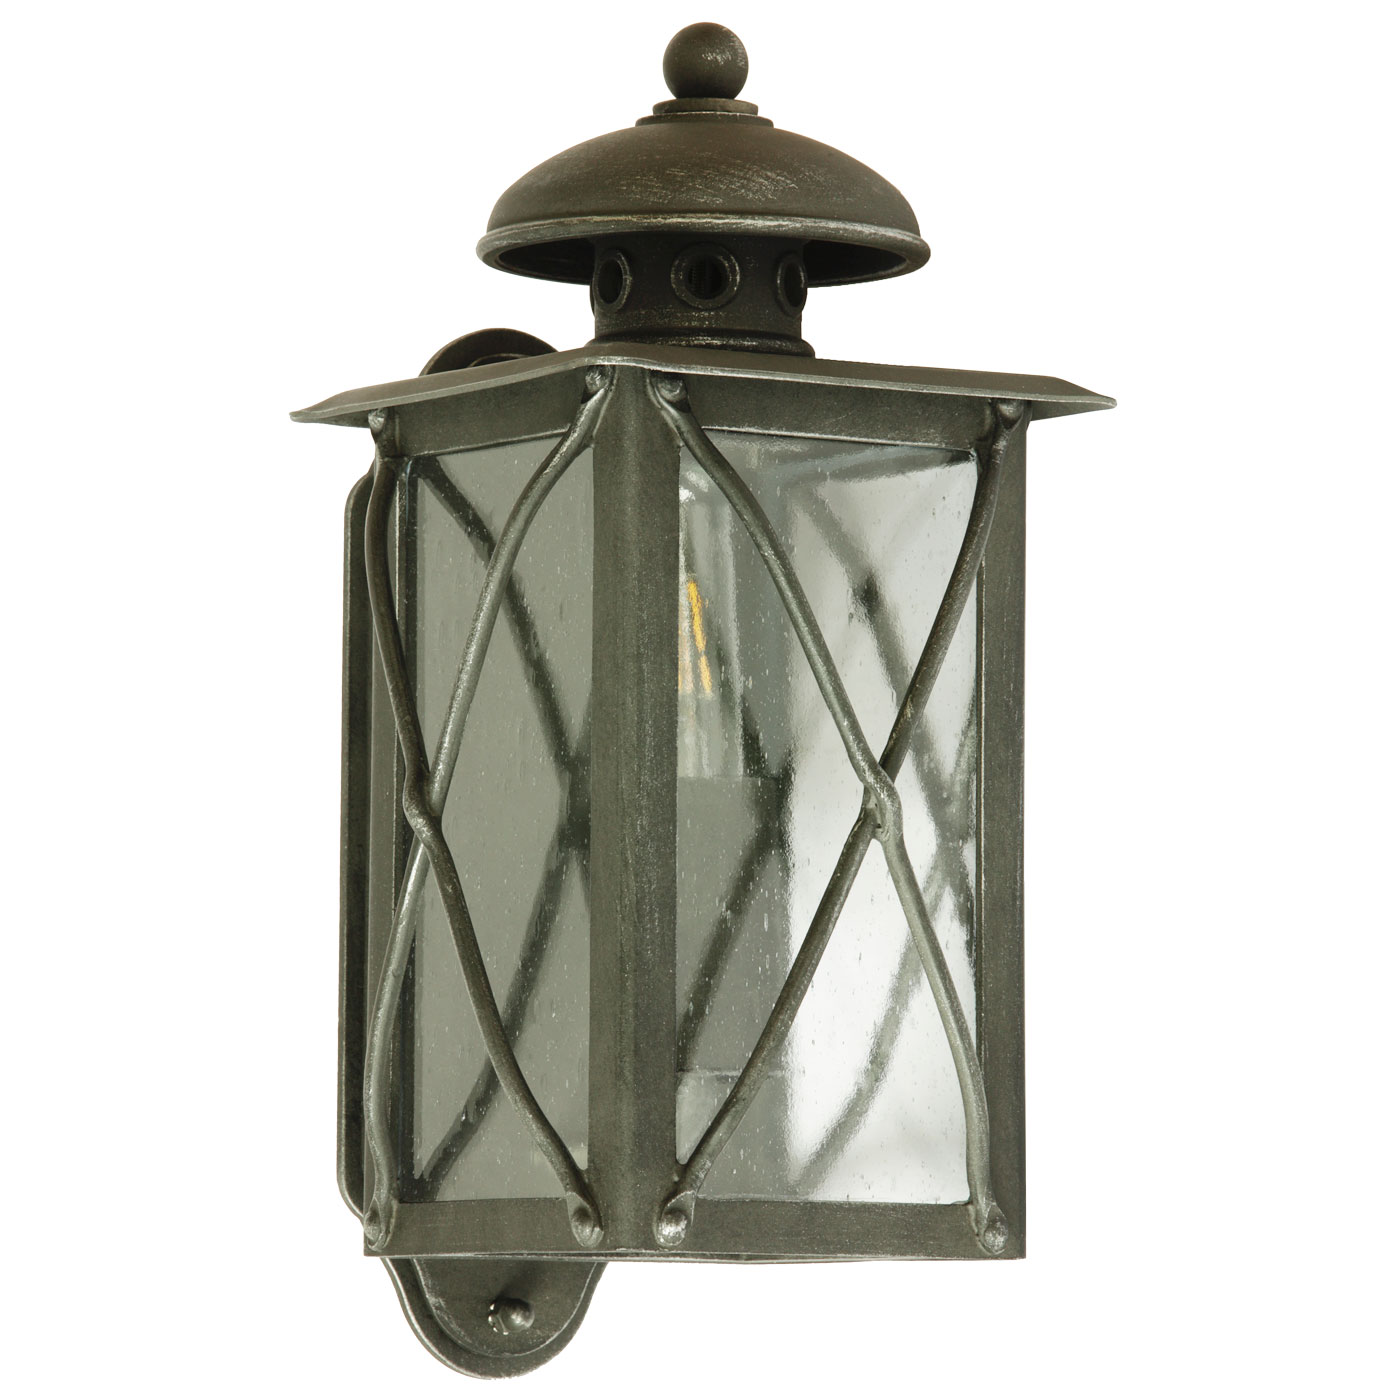 Handcrafted German Outdoor Wall Lantern with Grill 3412